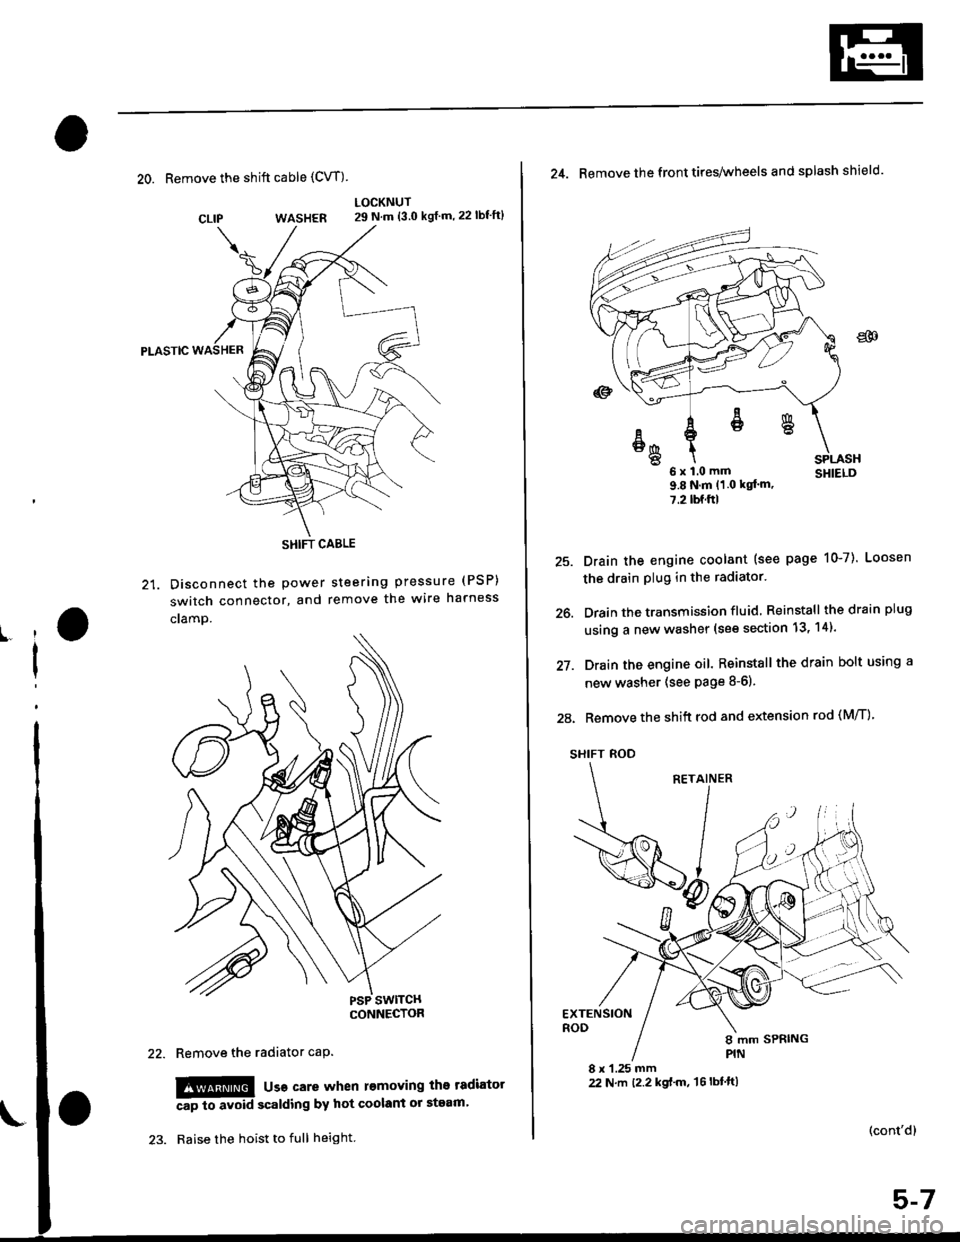 HONDA CIVIC 1998 6.G Workshop Manual 20. Remove the shift cable (CVT)
WASHER
Pt-Aslc
21. Disconnect the Power
switch connector, and
cramp.
LOCKNUT29 N.m {3.0 kgf m,22lbfft}
steering pressure (PSP)
remove the wire harness
CLIP
ll
I
Remov